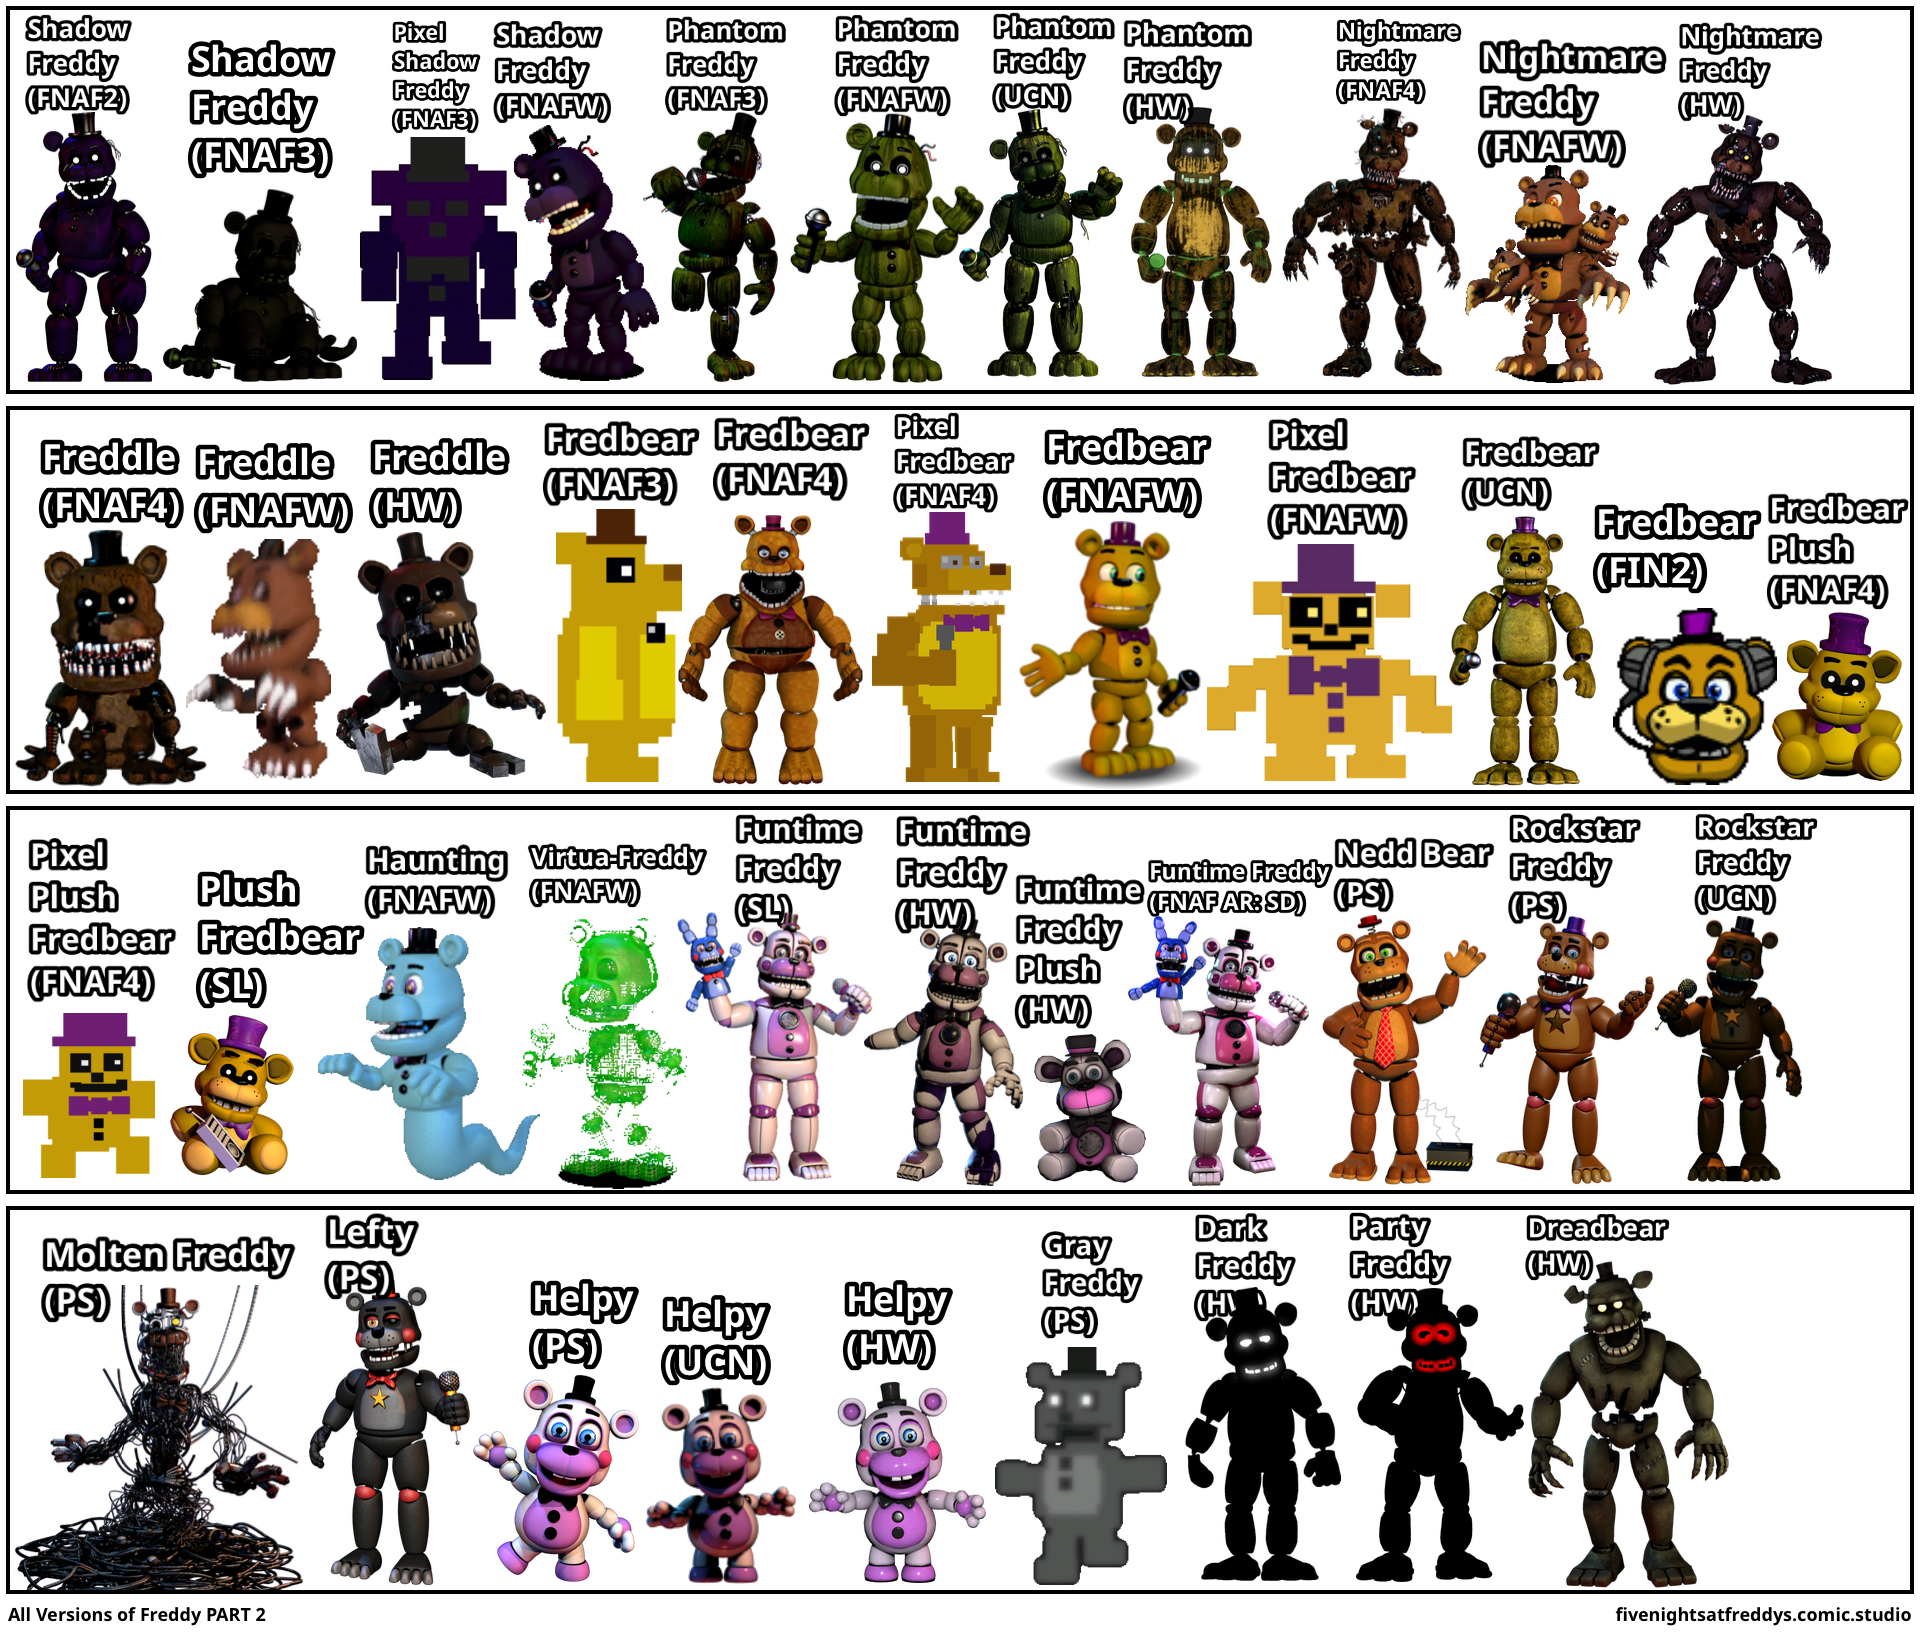 All Versions of Freddy PART 2